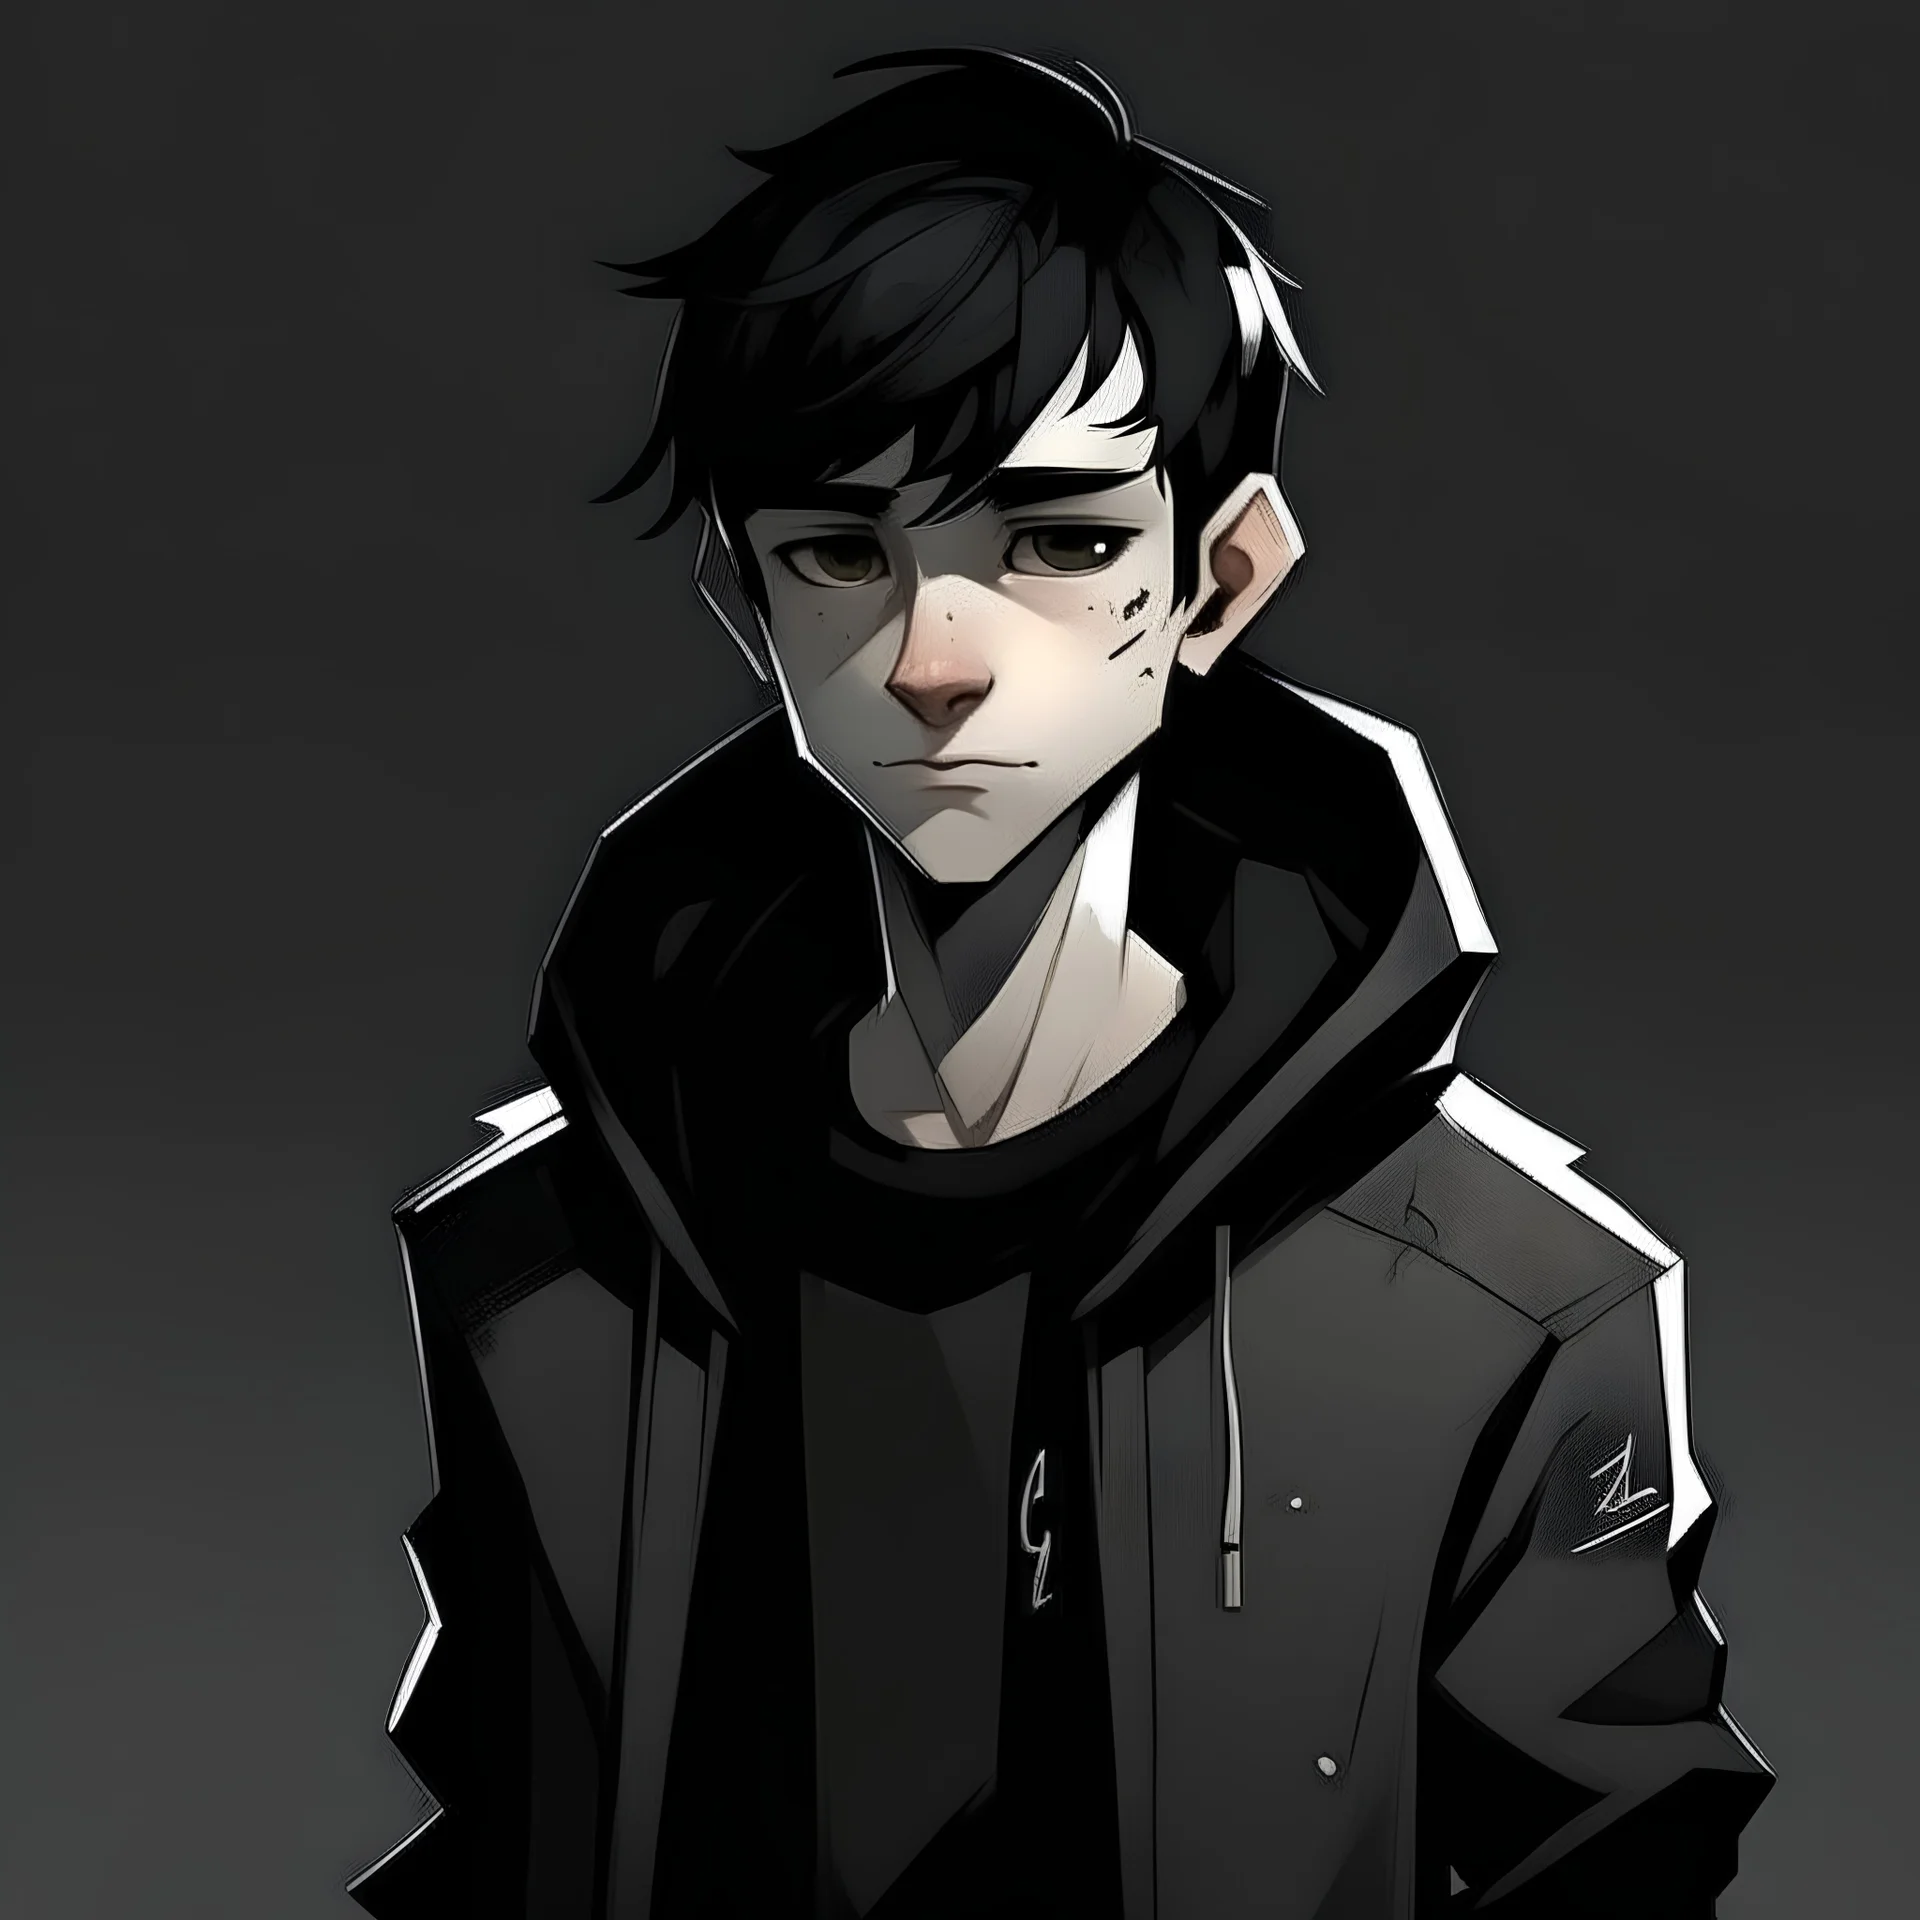 animated guy with white skin, short and messy hair that is black with white streaks through it, wearing long, black jacket